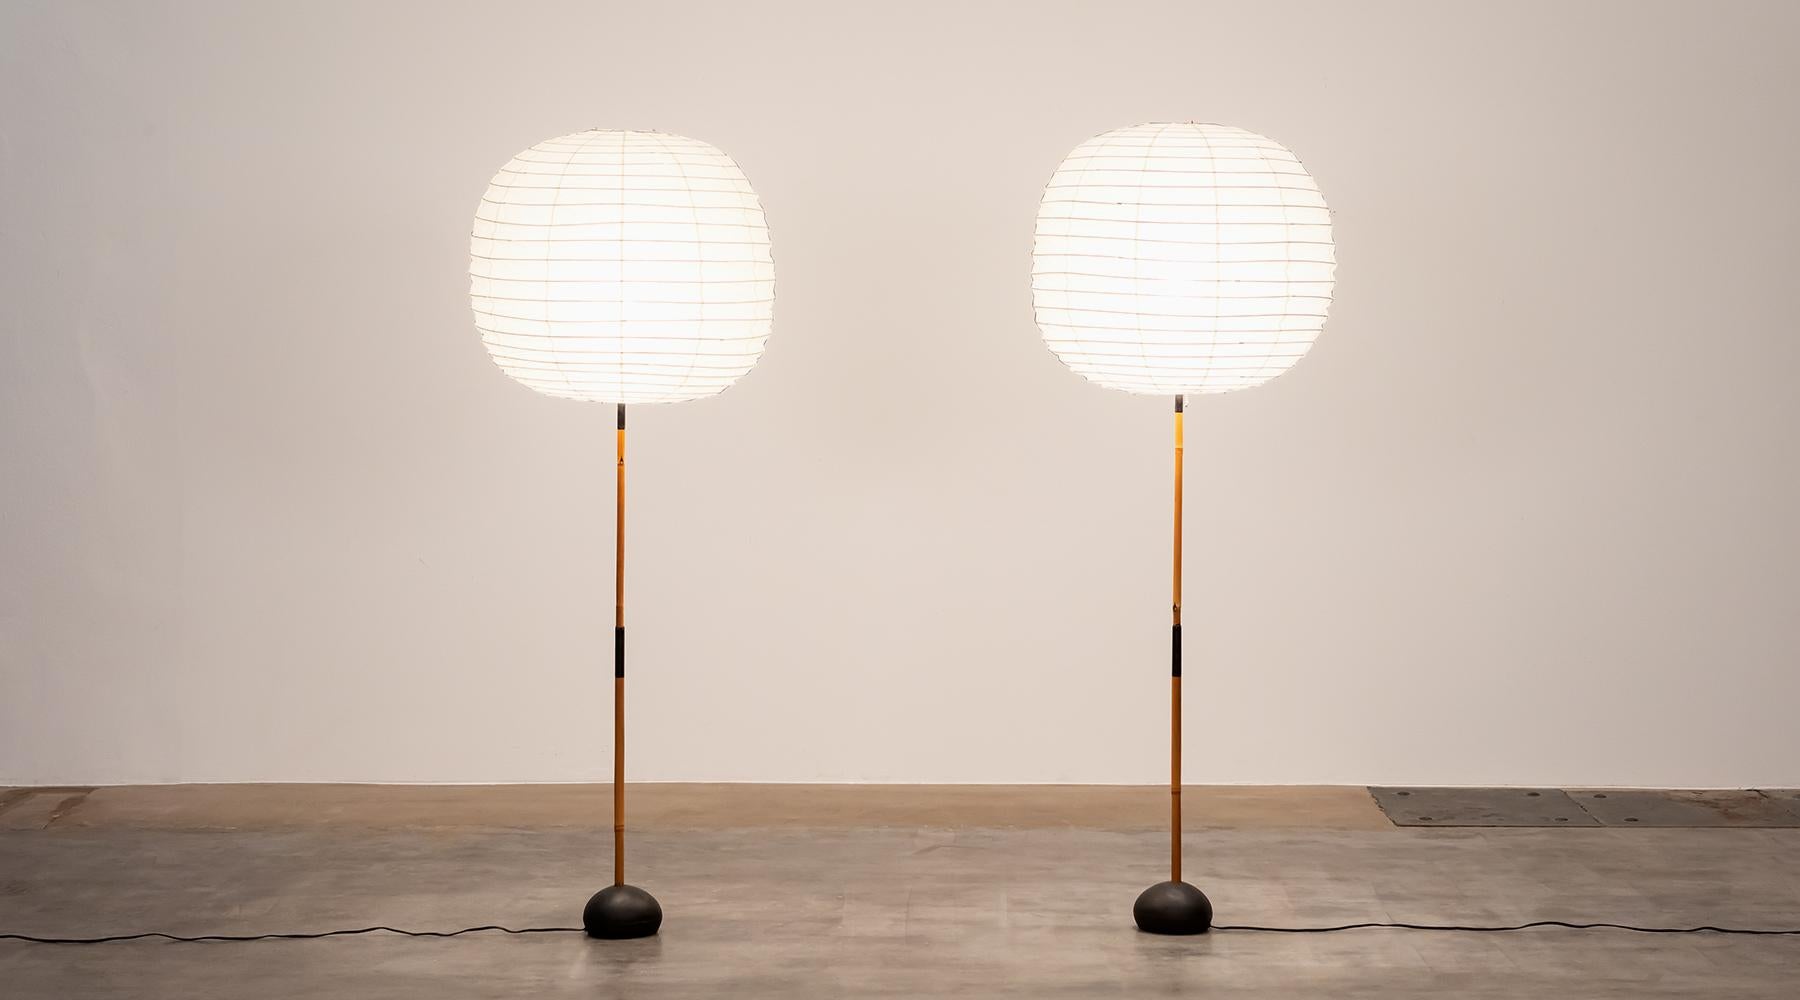 Sculptural light, pair of Floor Lamps by Isamu Noguchi, USA, 1952.

Beautiful Floor Lamps by Isamu Noguchi. The shade is made out of fine paper followed by a bamboo stem ends on a iron base. The lamps promises a very warm, pleasant light.